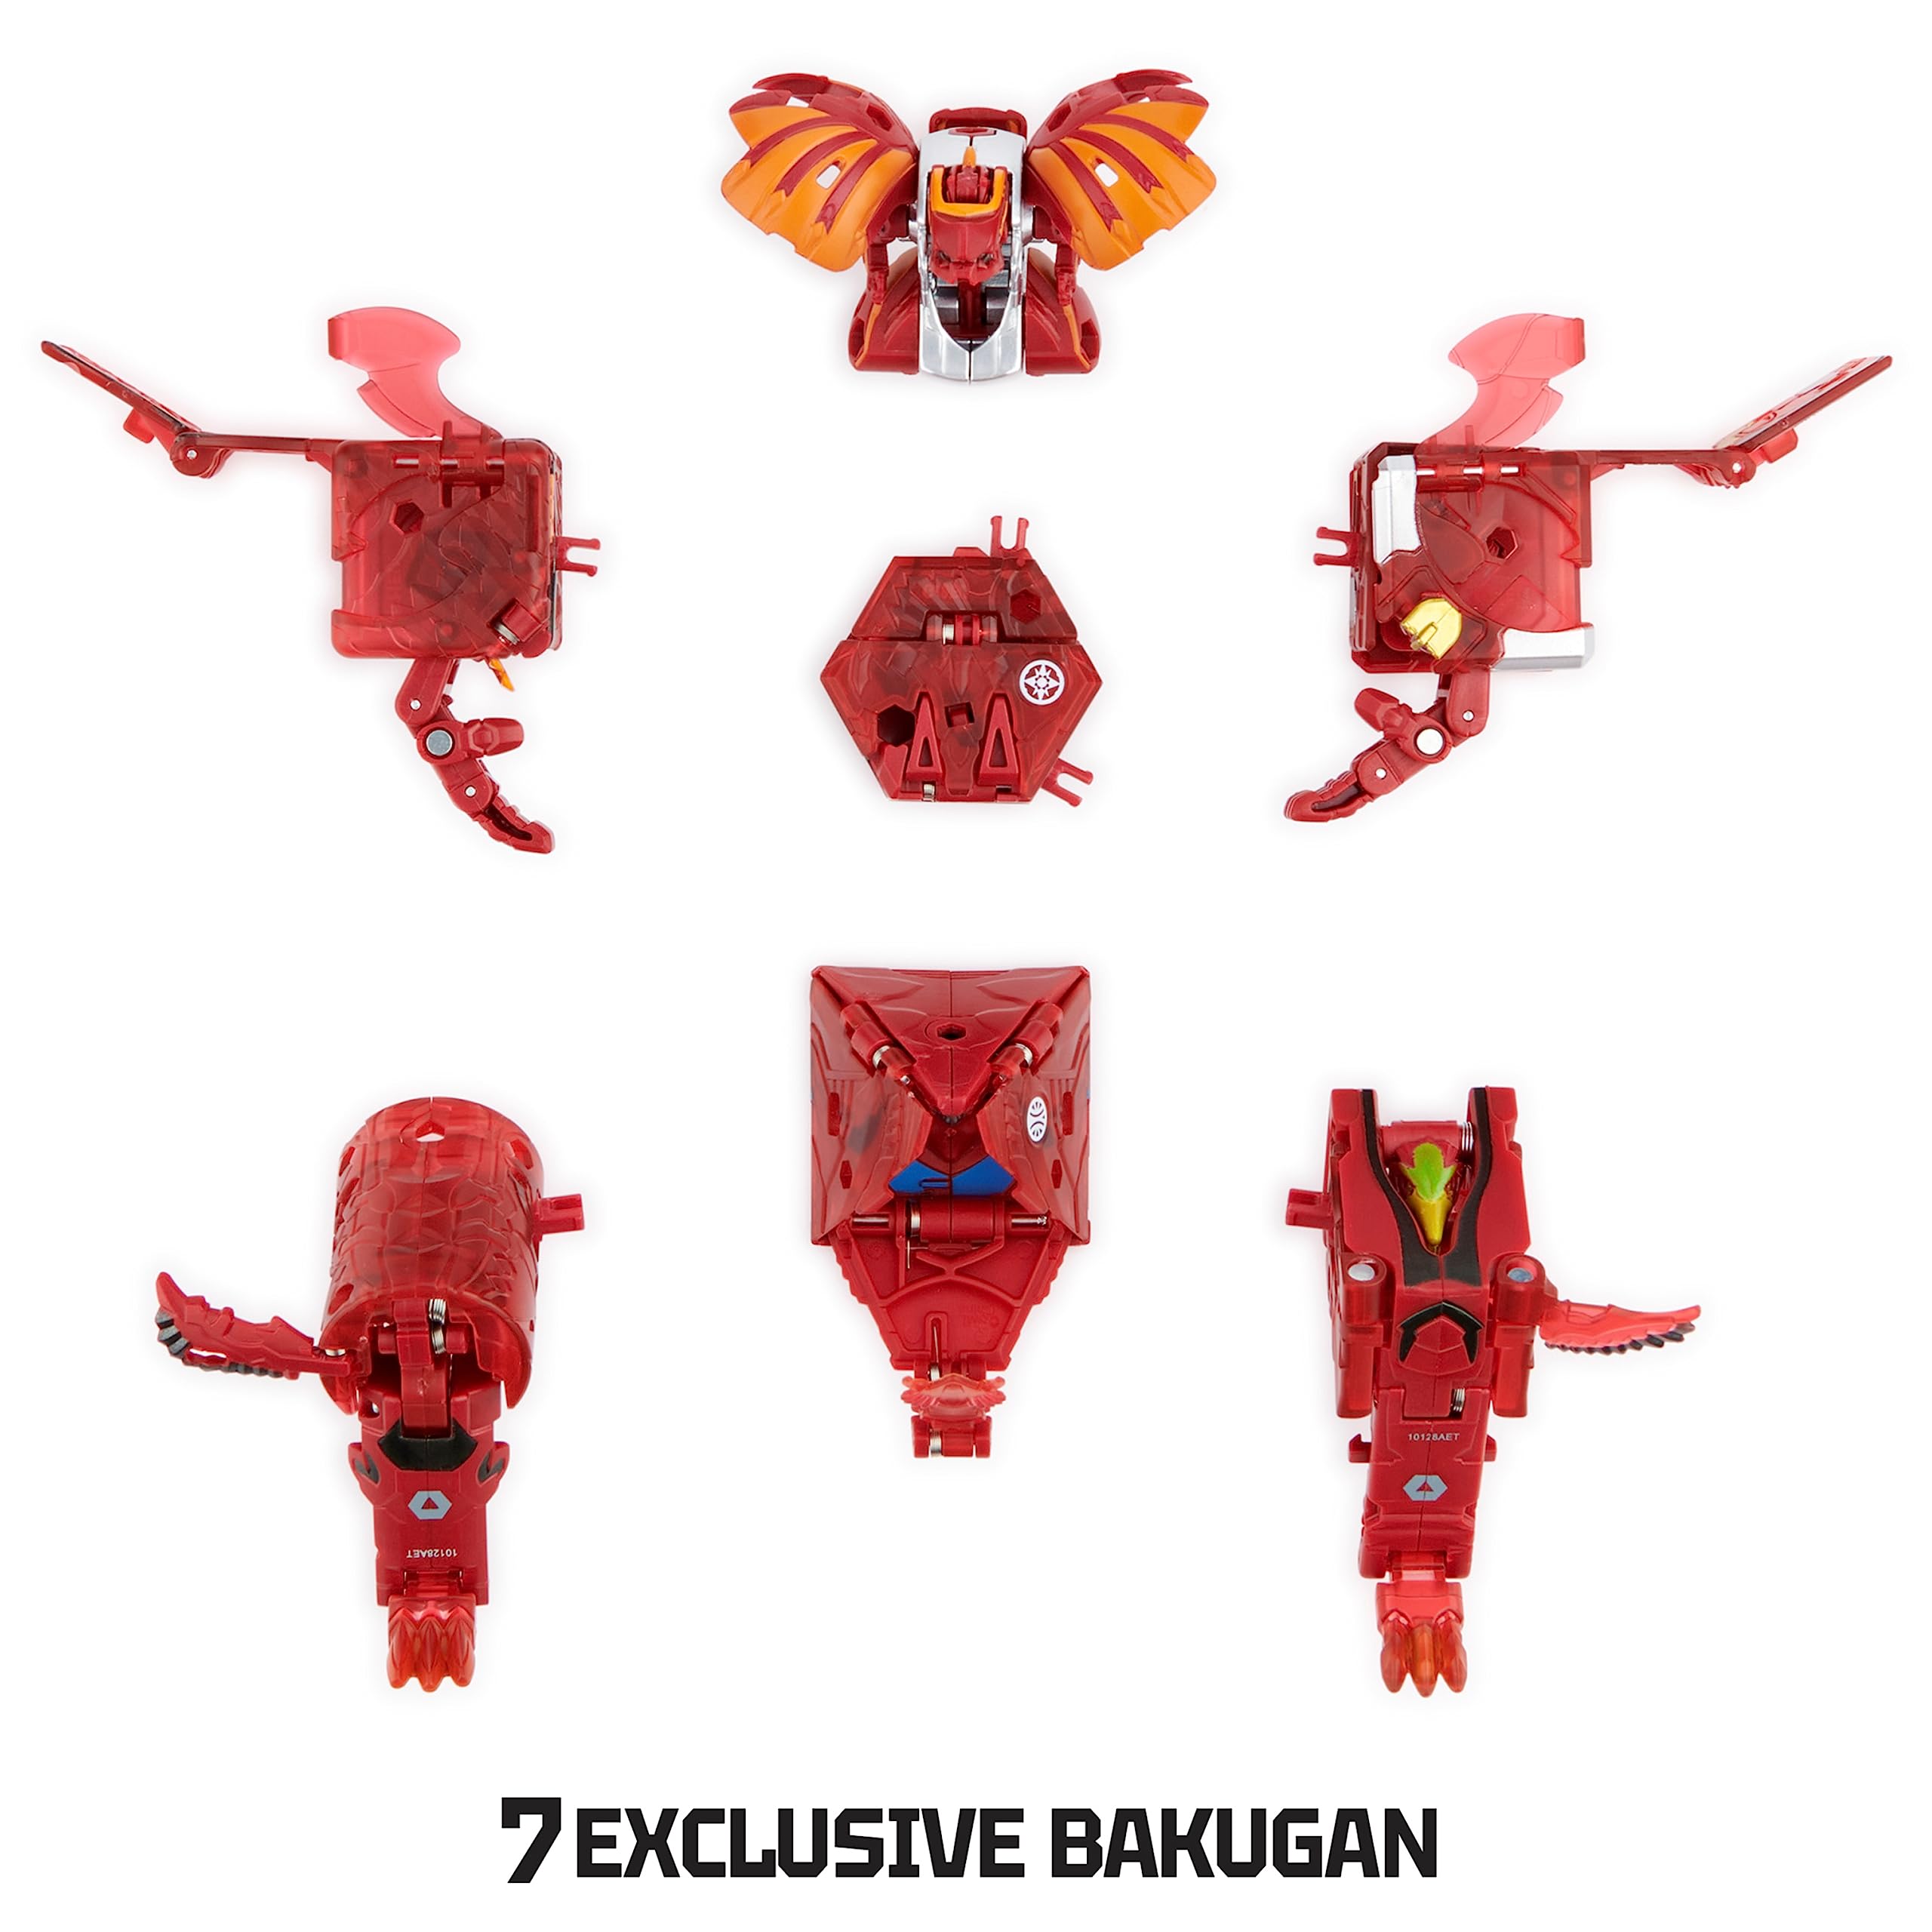 Bakugan GeoForge Dragonoid, 7-in-1 Includes Exclusive True Metal Dragonoid and 6 Geogan Collectibles, Kids Toys for Boys